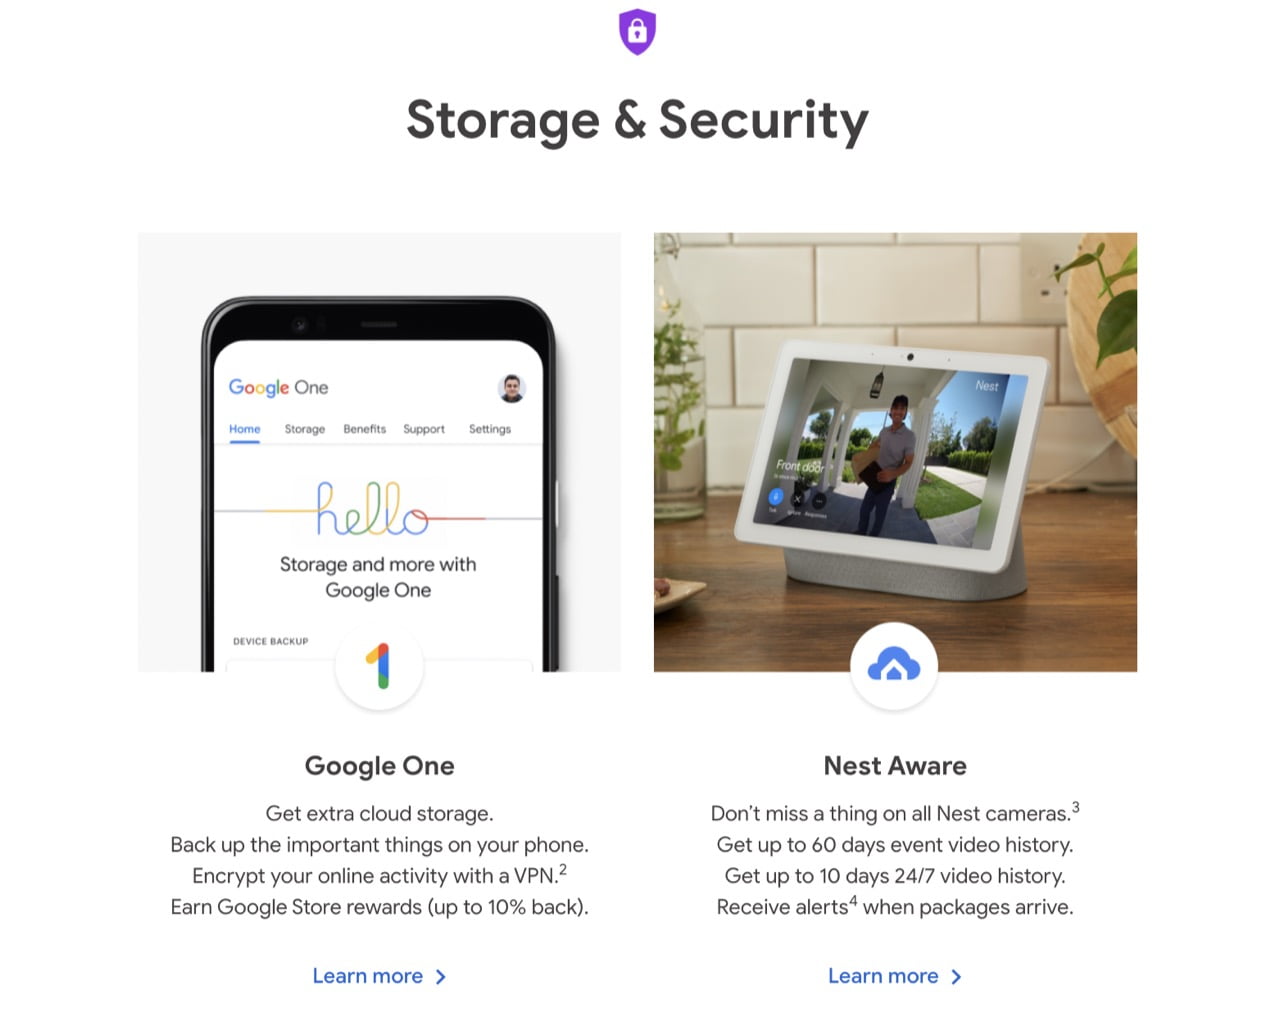 Google Store launches Google subscriptions and services